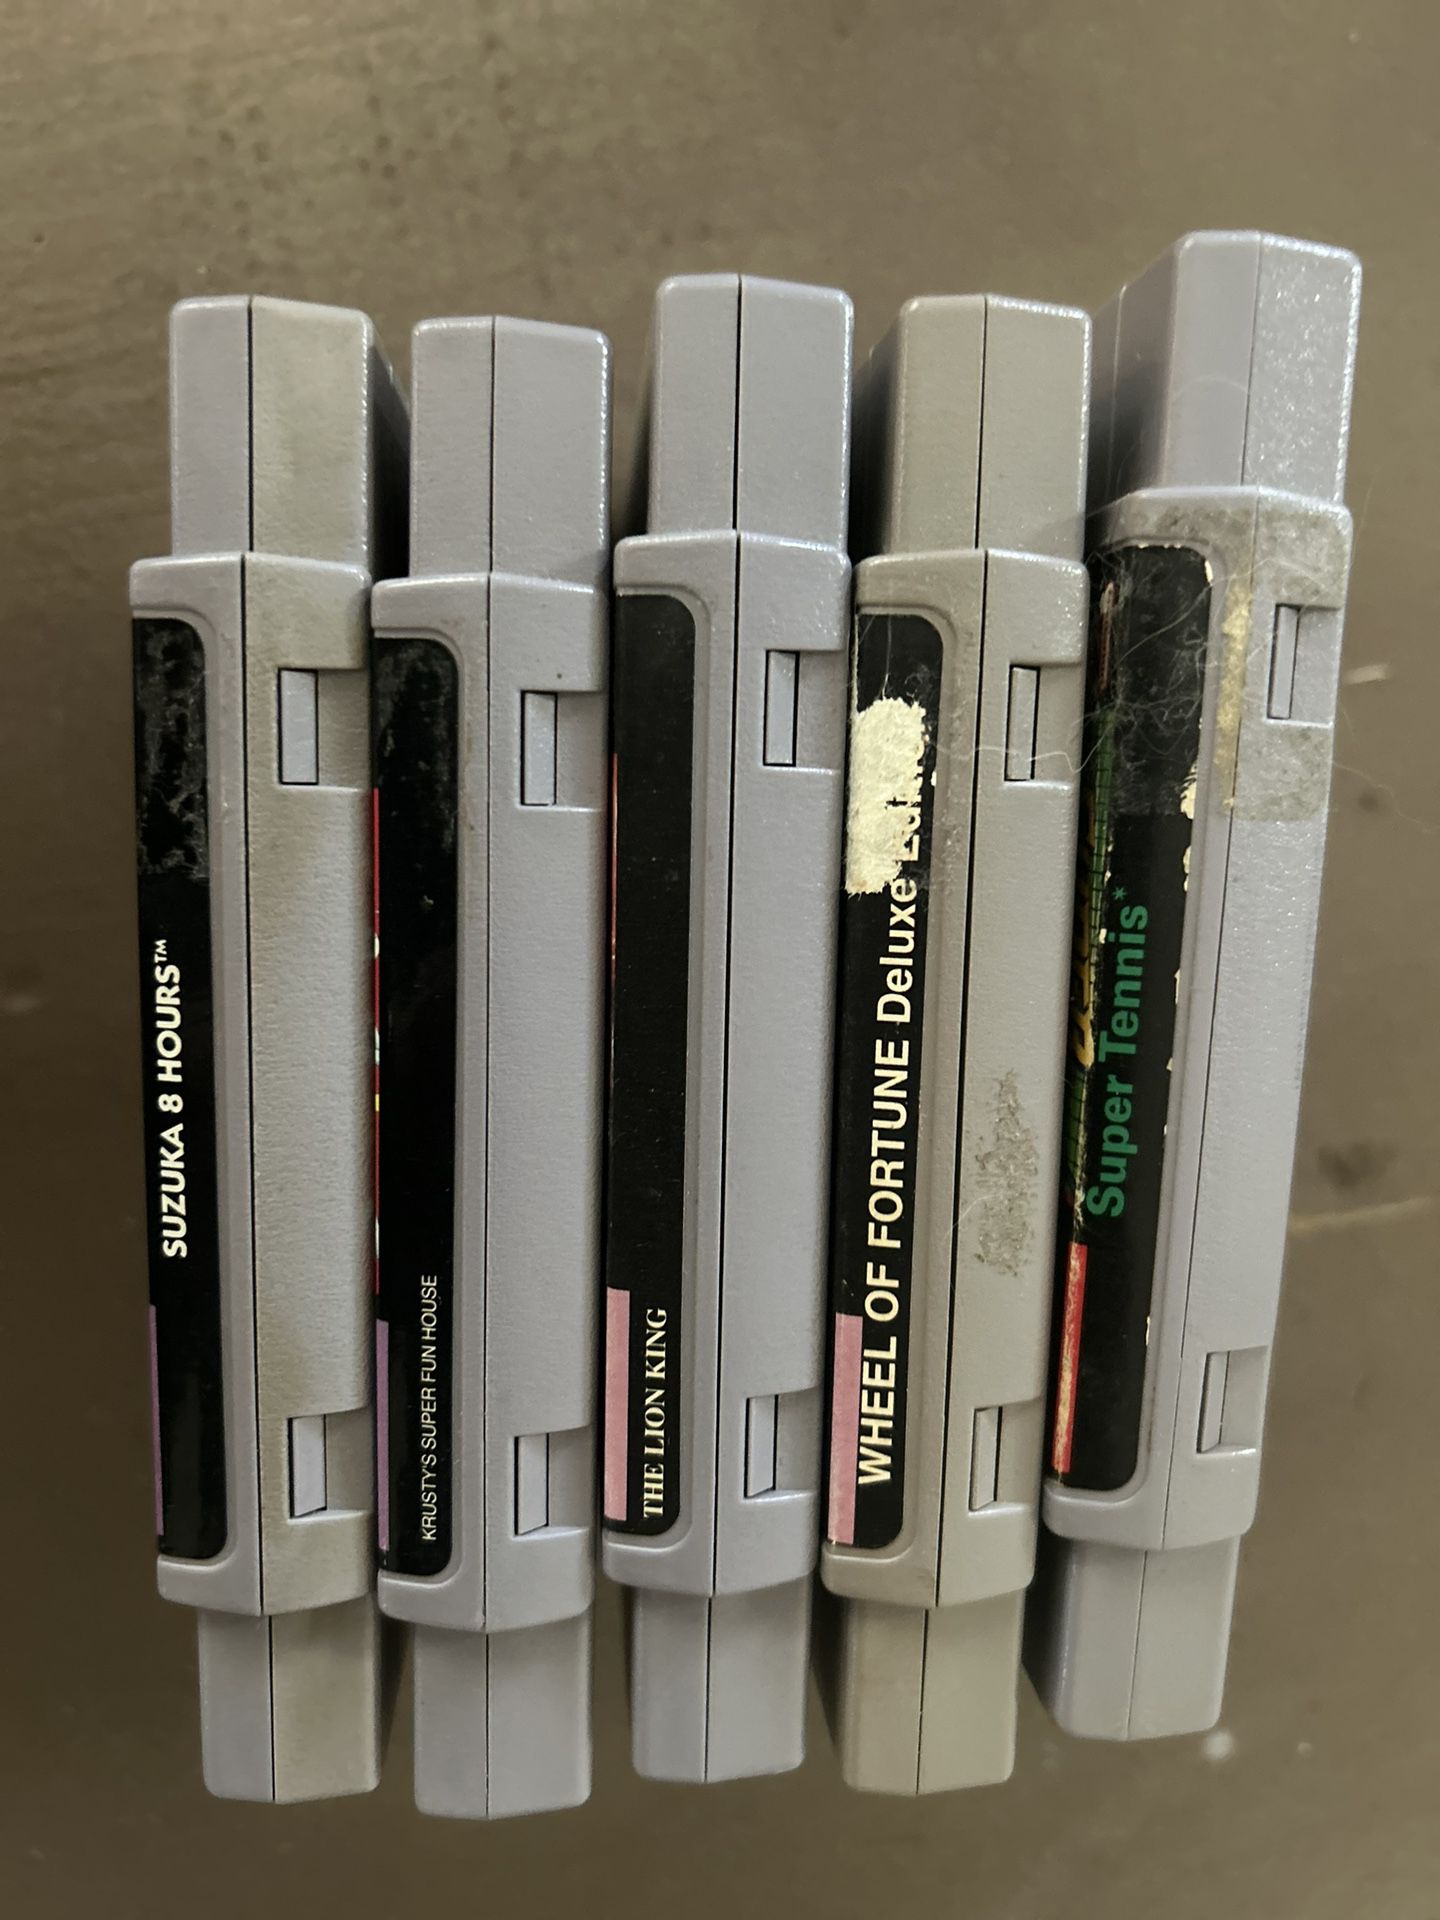 Super Nintendo Video Games. Five Games. Used. As Is